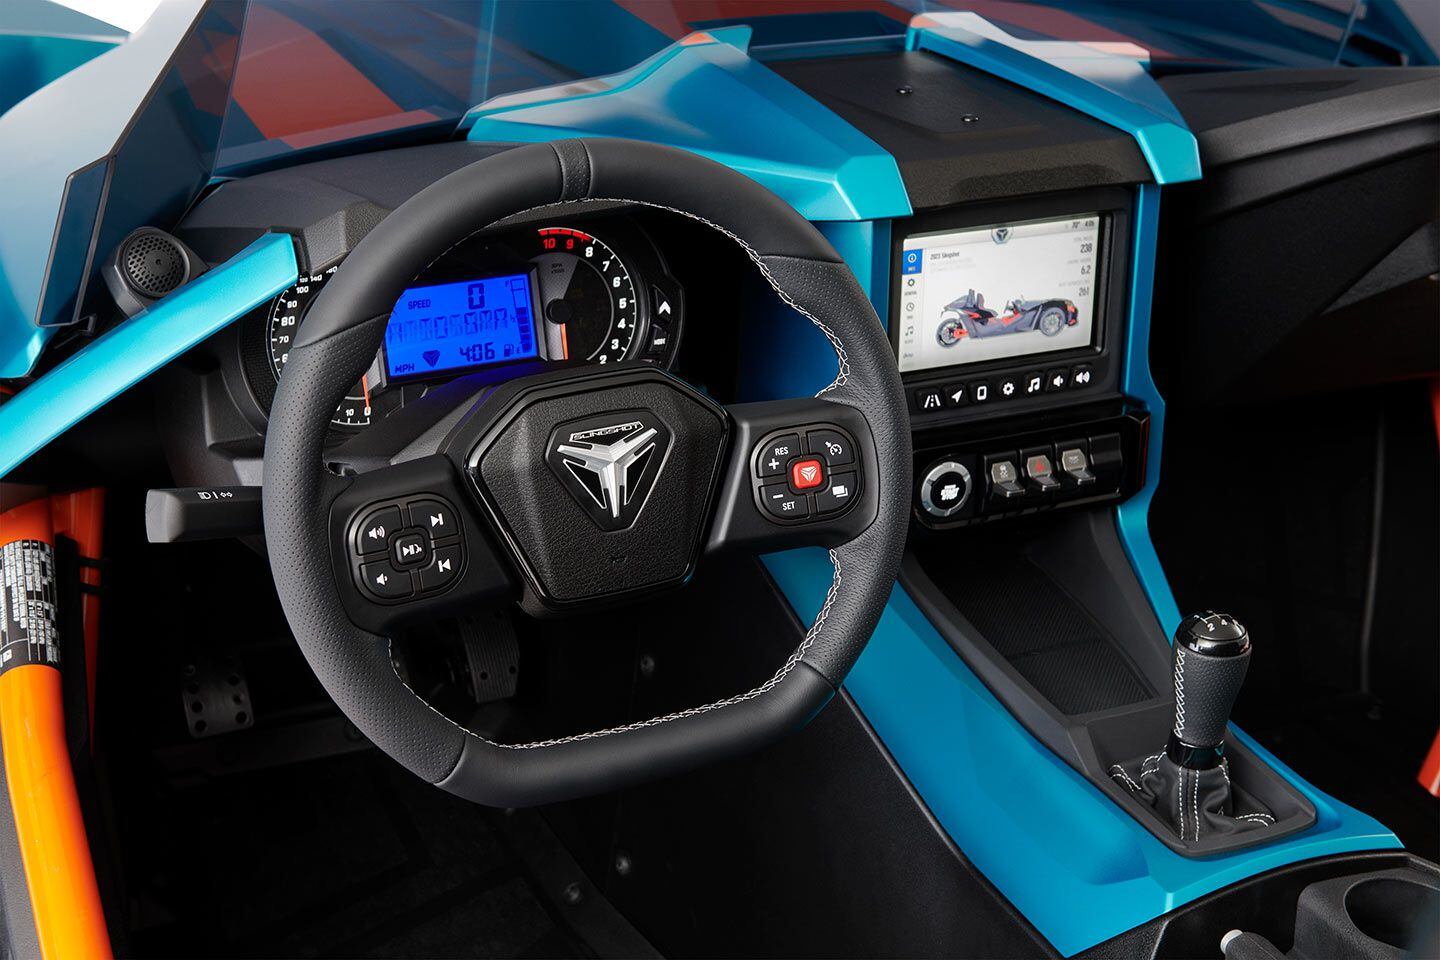 The interior of the Polaris Slingshot R is similar to a low-slung sports car.